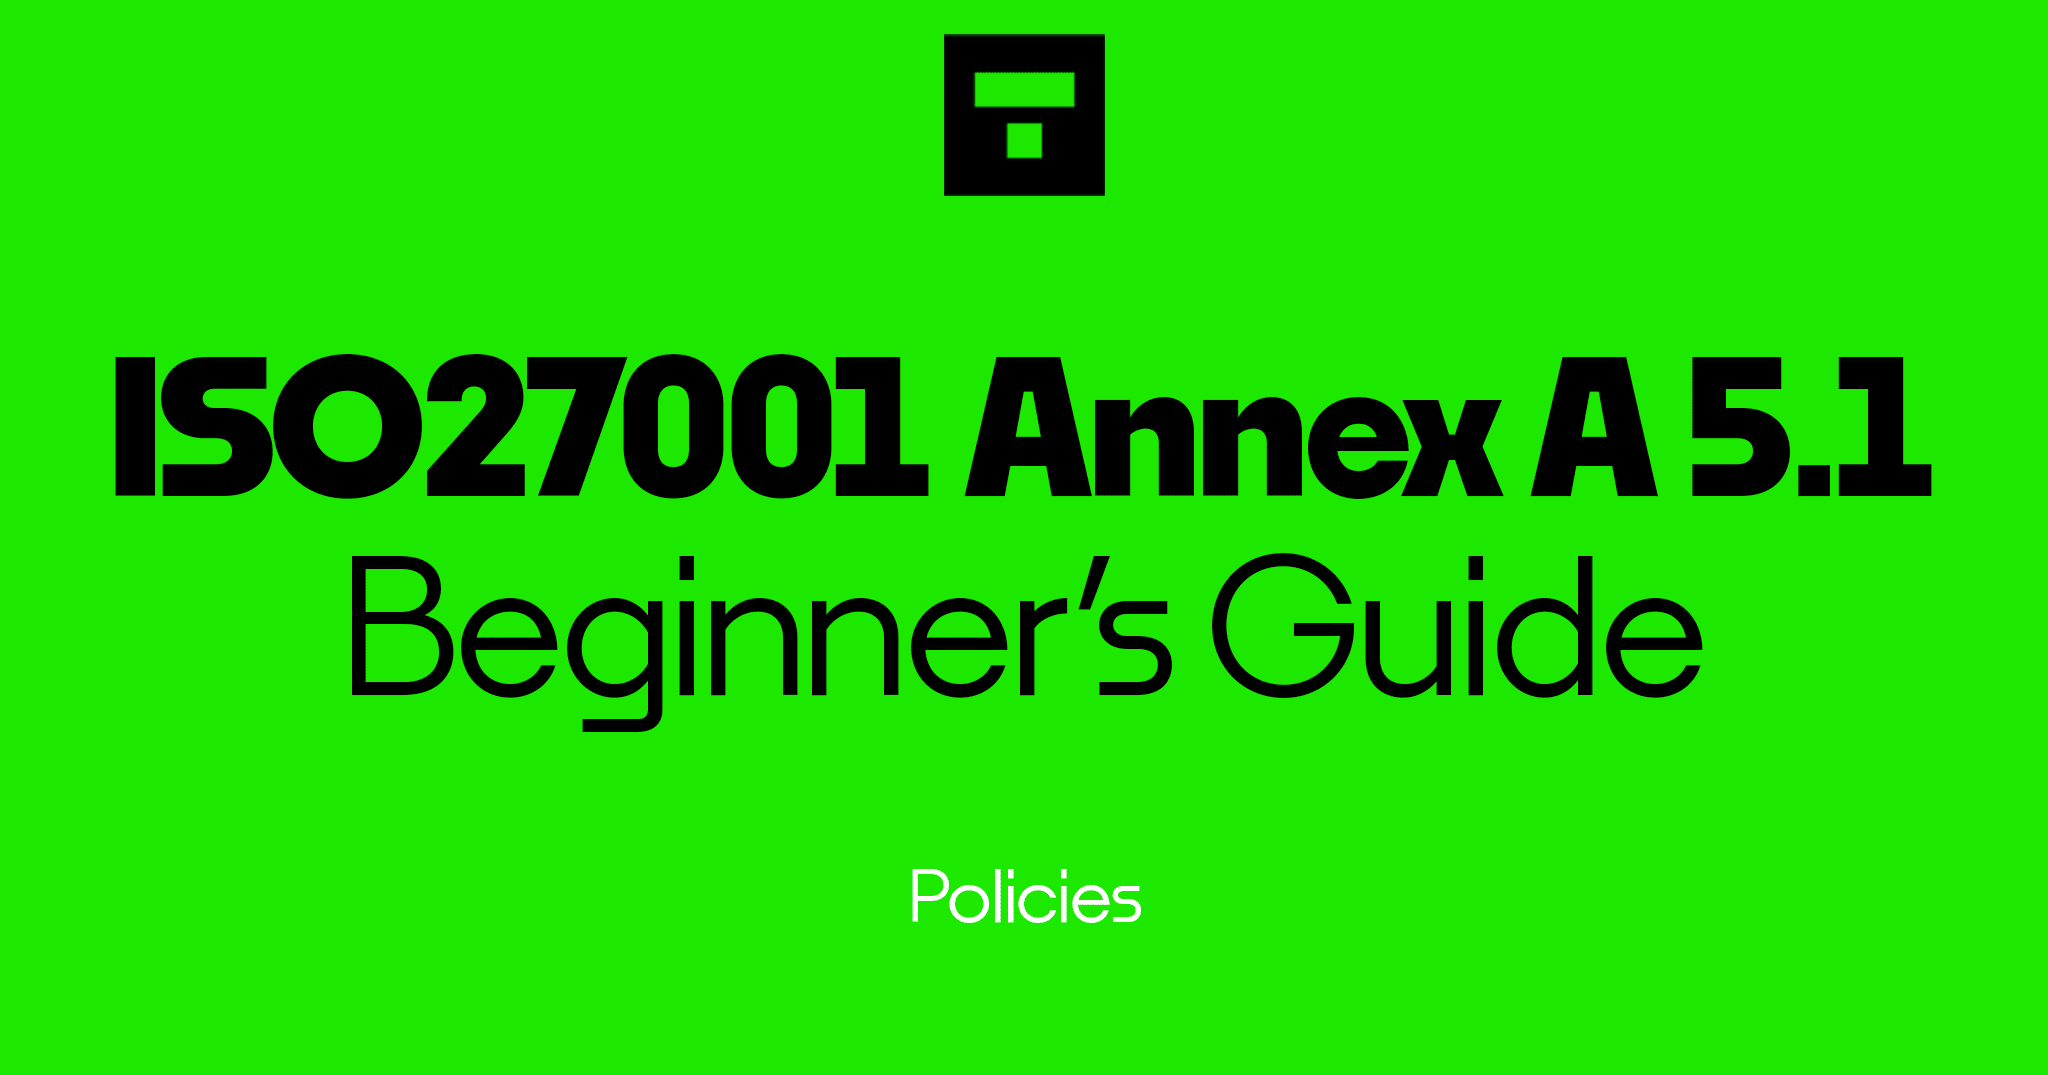 ISO 27001 Annex A 5.1 Policies Beginner’s Guide